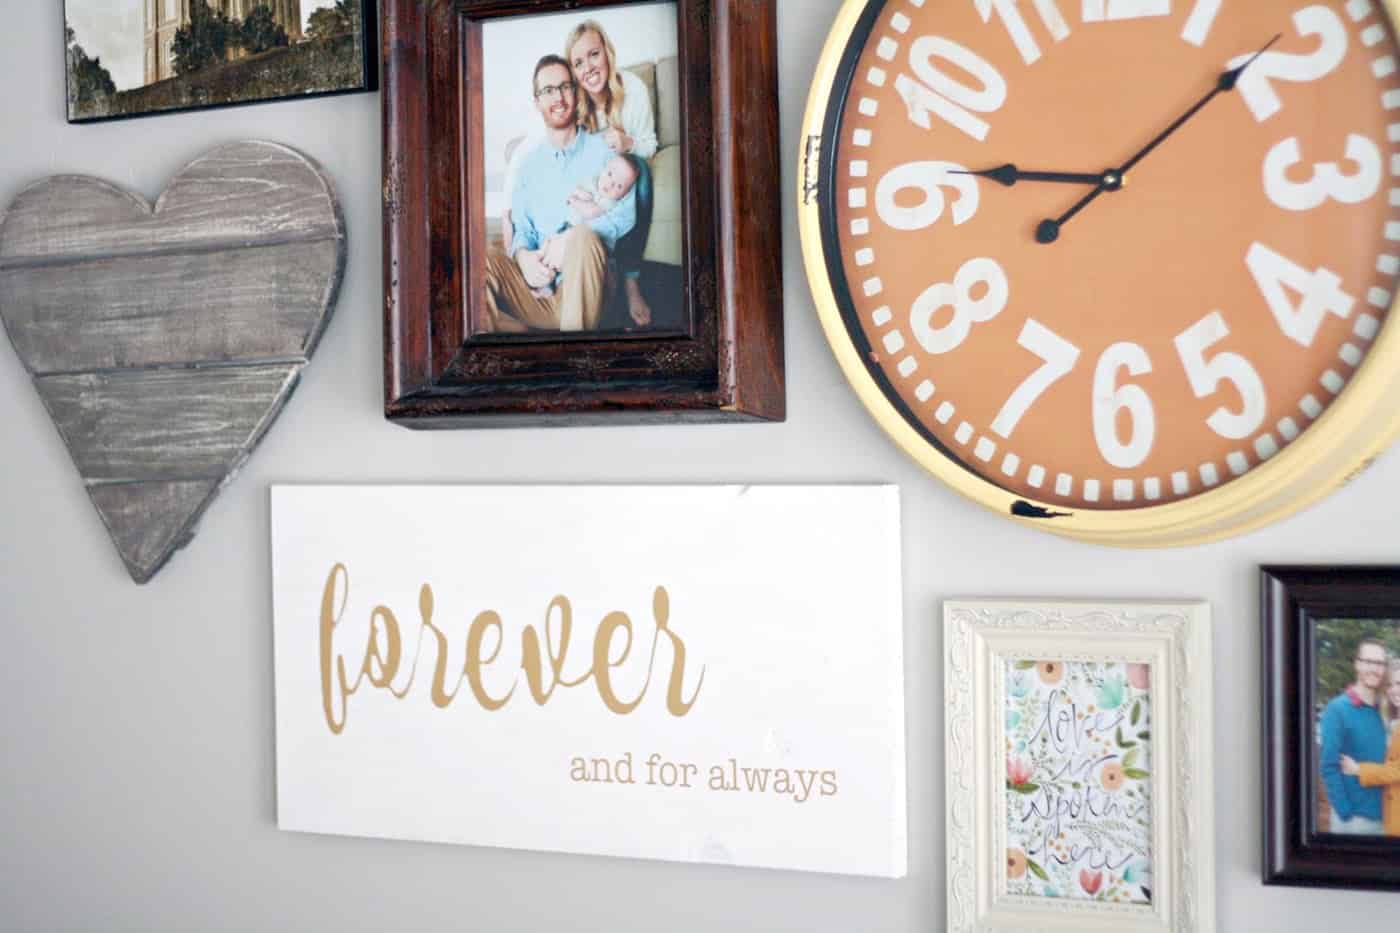 Add this easy "forever and always" wall art decor piece to an existing gallery wall - it's simple yet makes a big statement! Customize in any color.